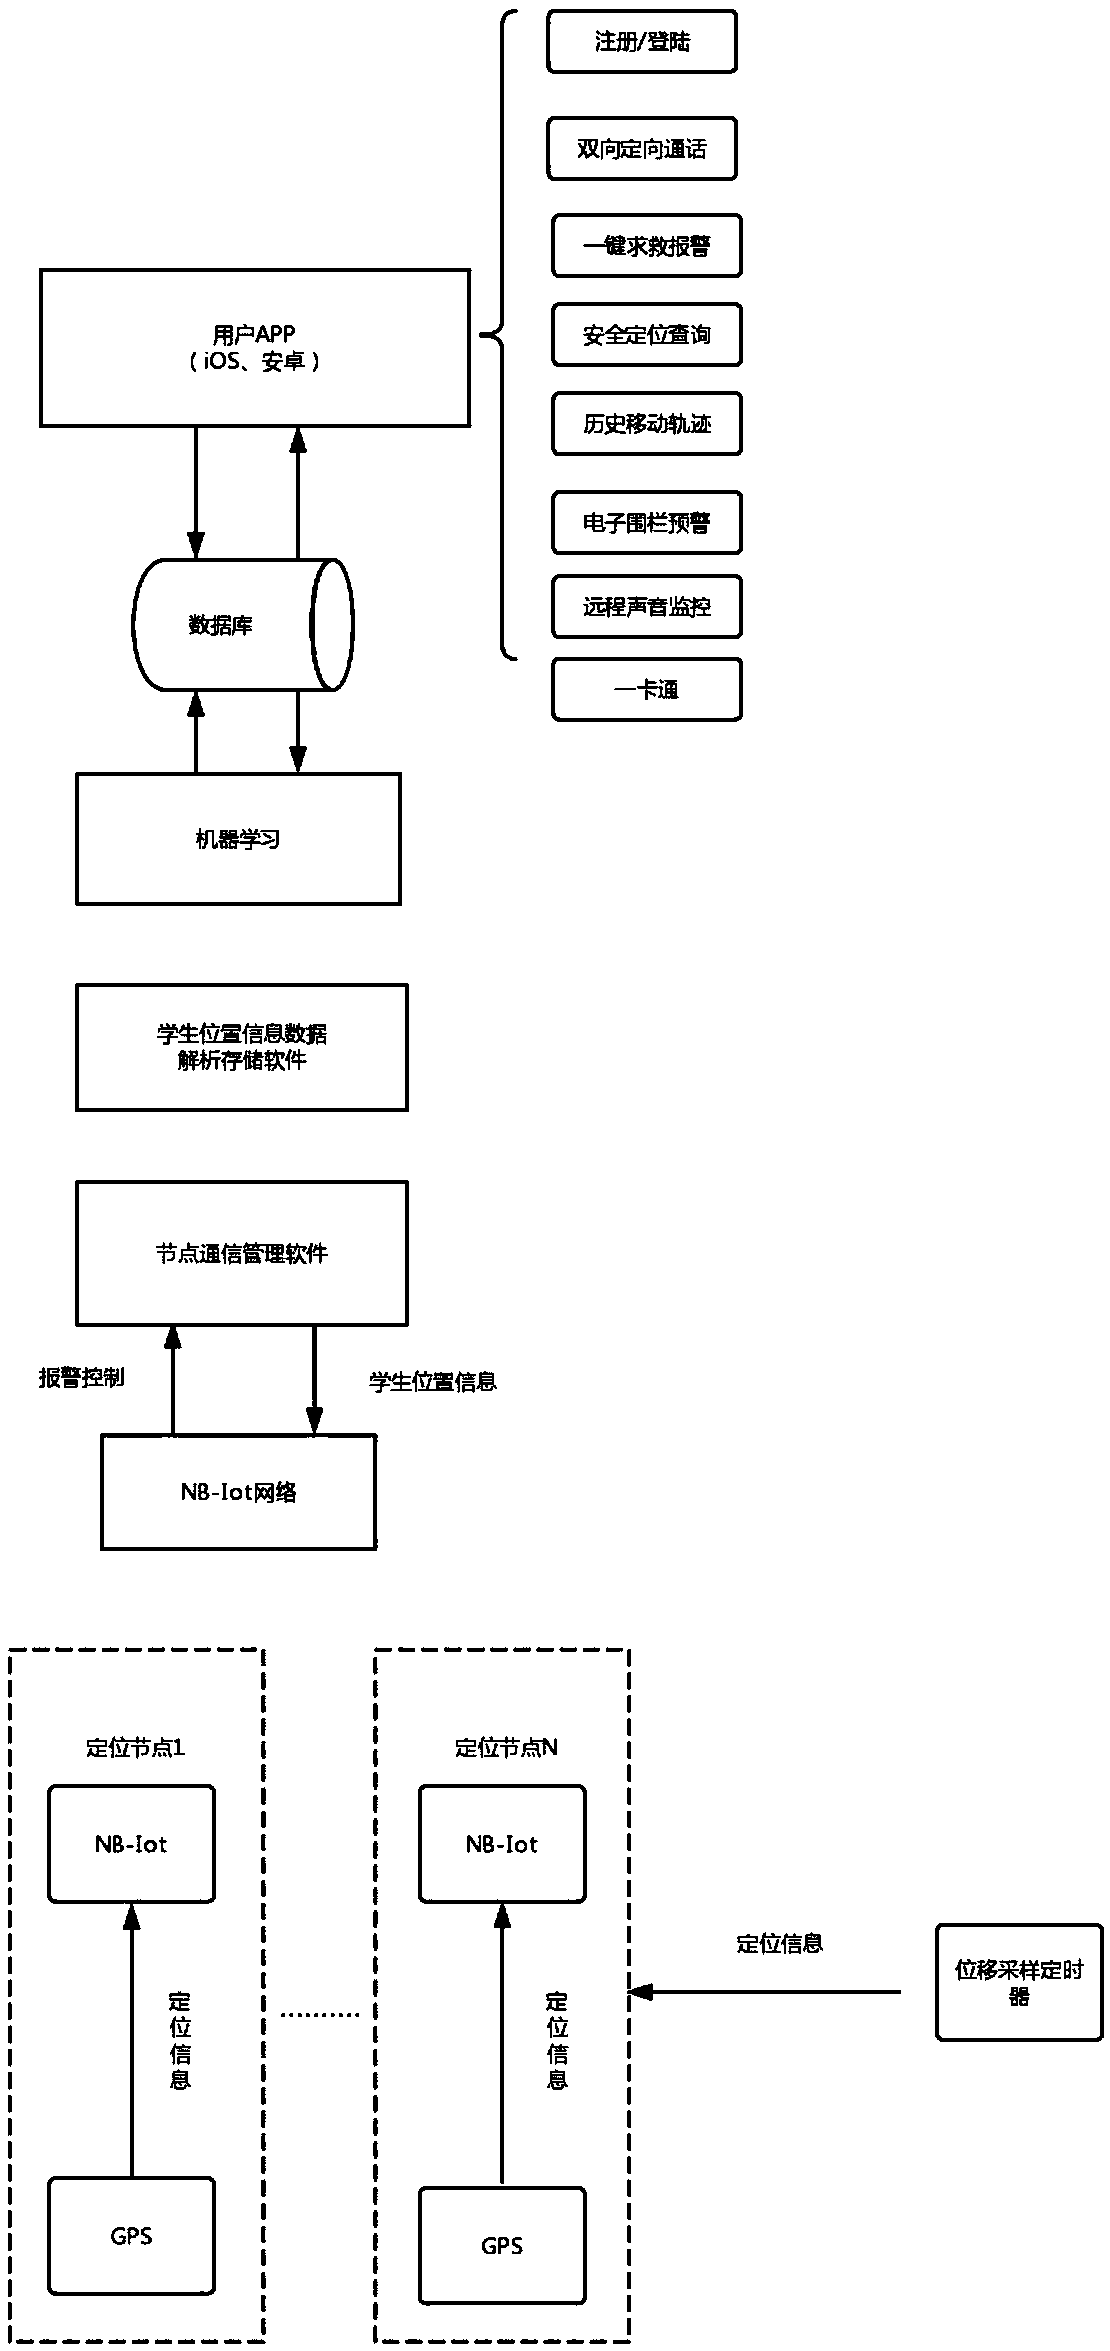 NB-IoT (Narrow Band Internet of Things) based school badge positioning system